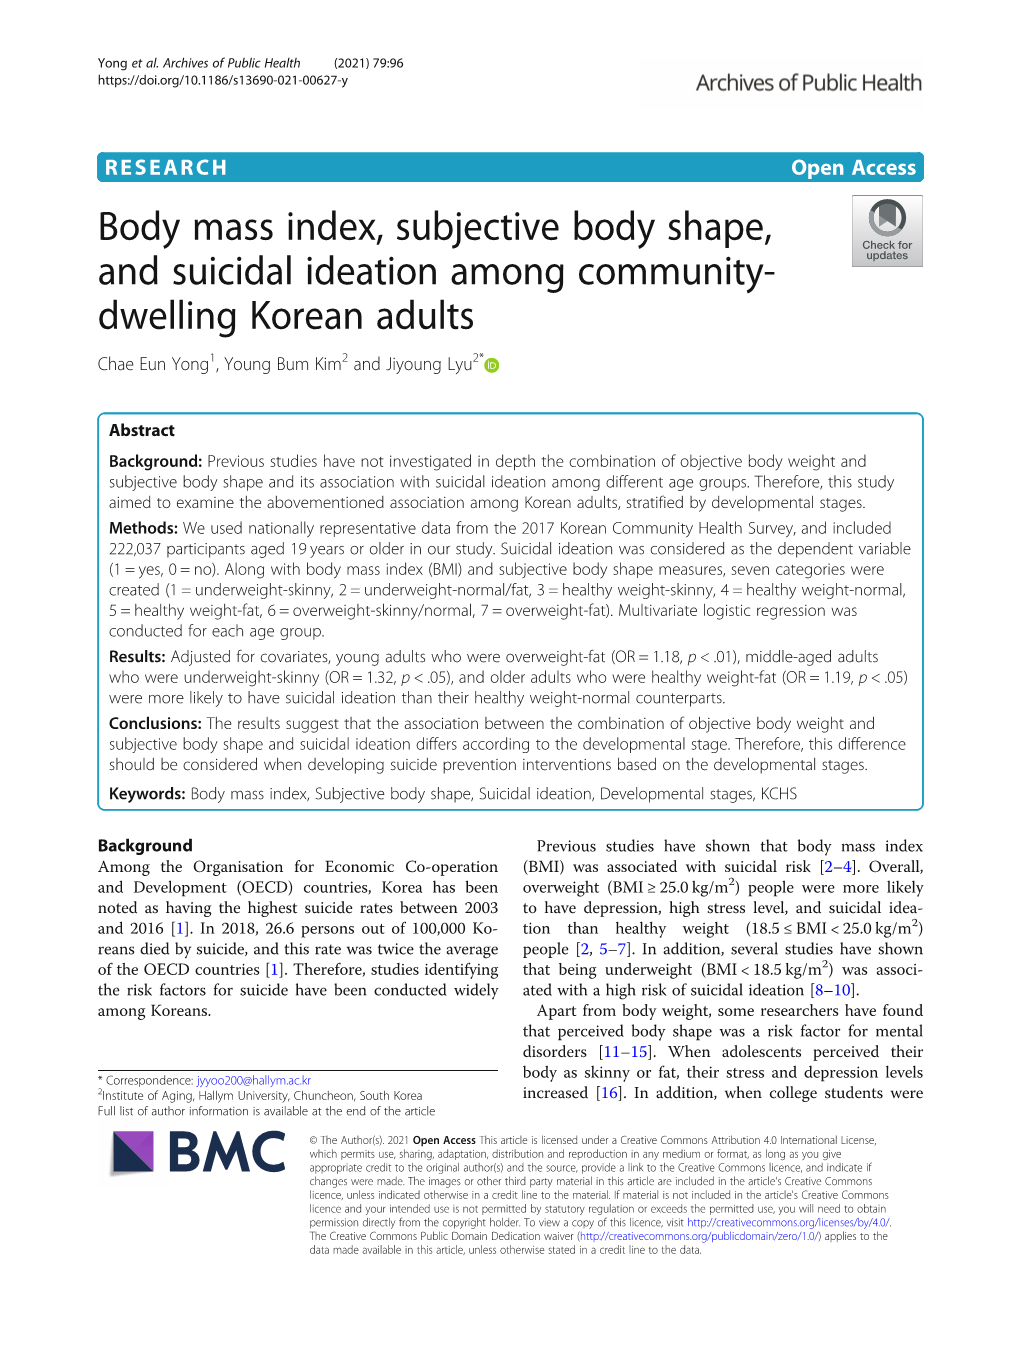 Body Mass Index, Subjective Body Shape, and Suicidal Ideation Among Community- Dwelling Korean Adults Chae Eun Yong1, Young Bum Kim2 and Jiyoung Lyu2*